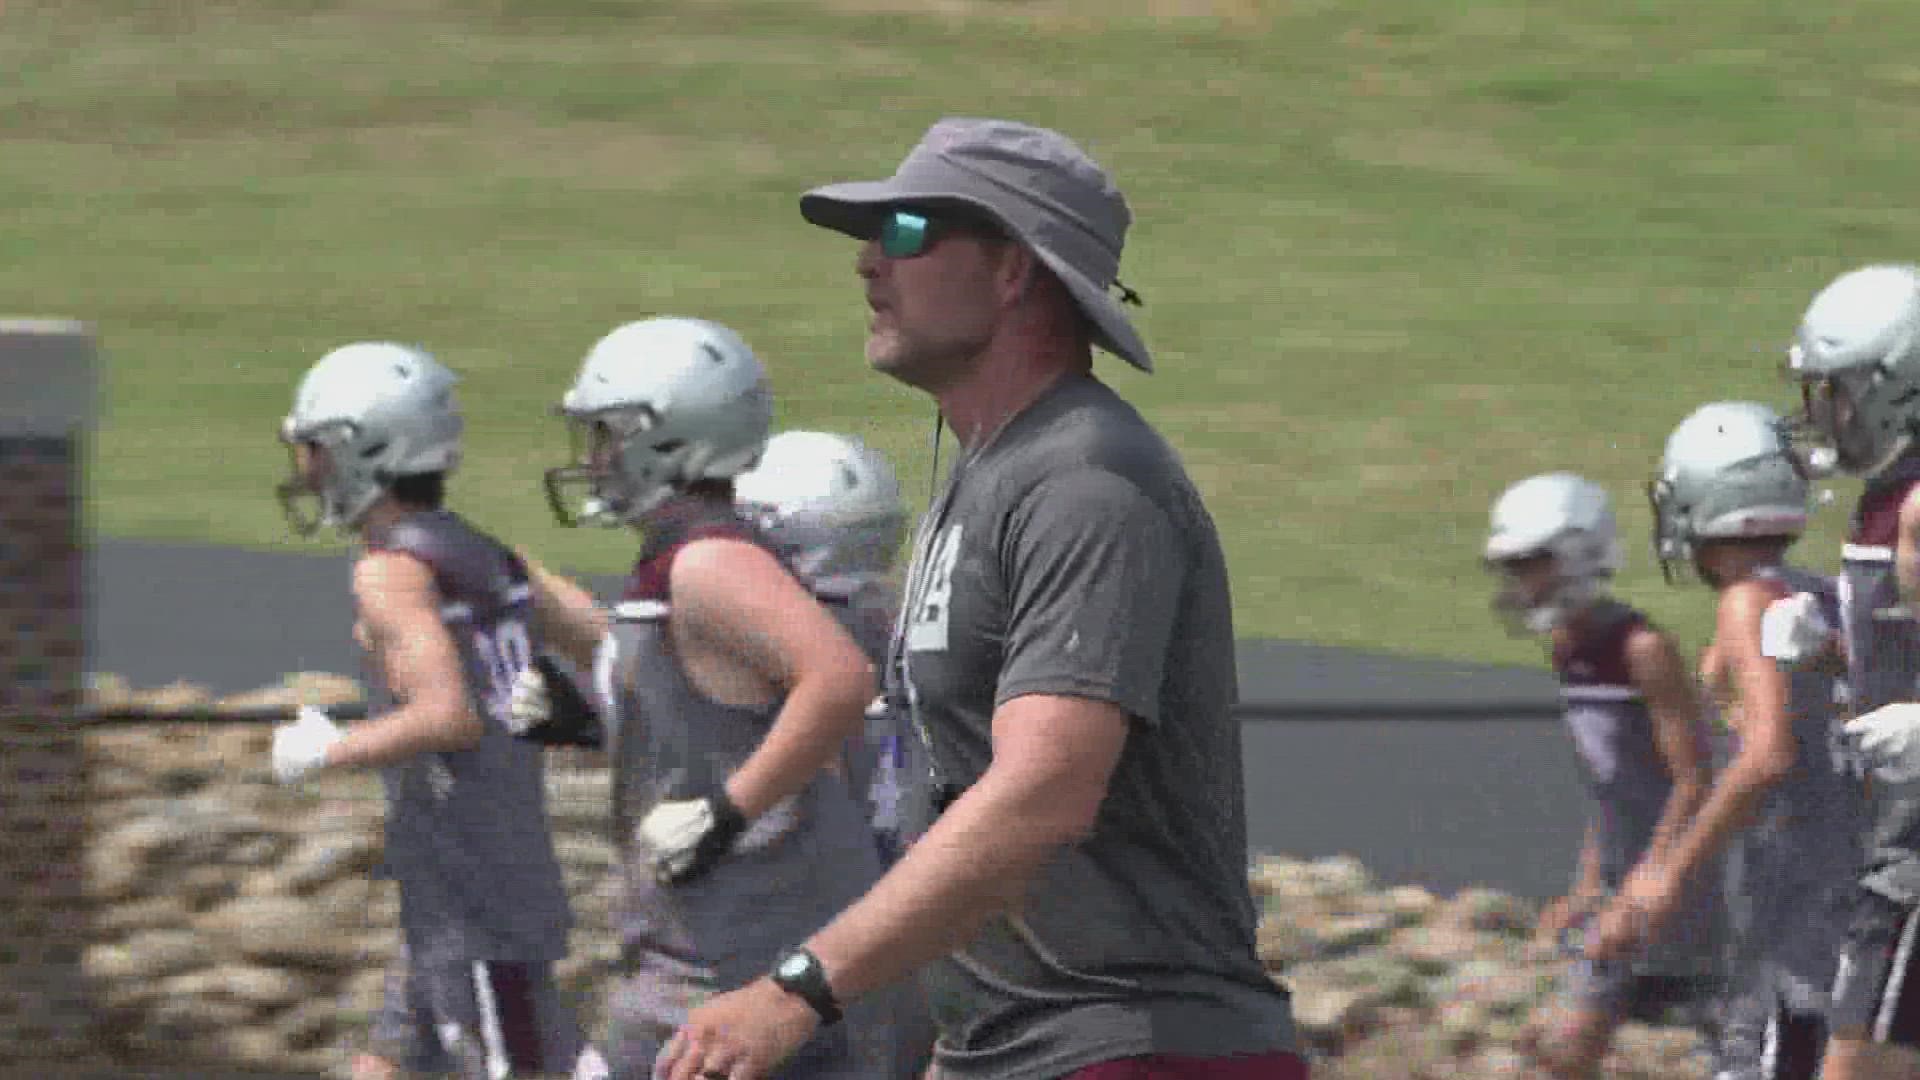 Fulton's Jeff McMillan and Alcoa's Brian Nix were both promoted from within their respective coaching staff and said they're ready for the new challenge this season